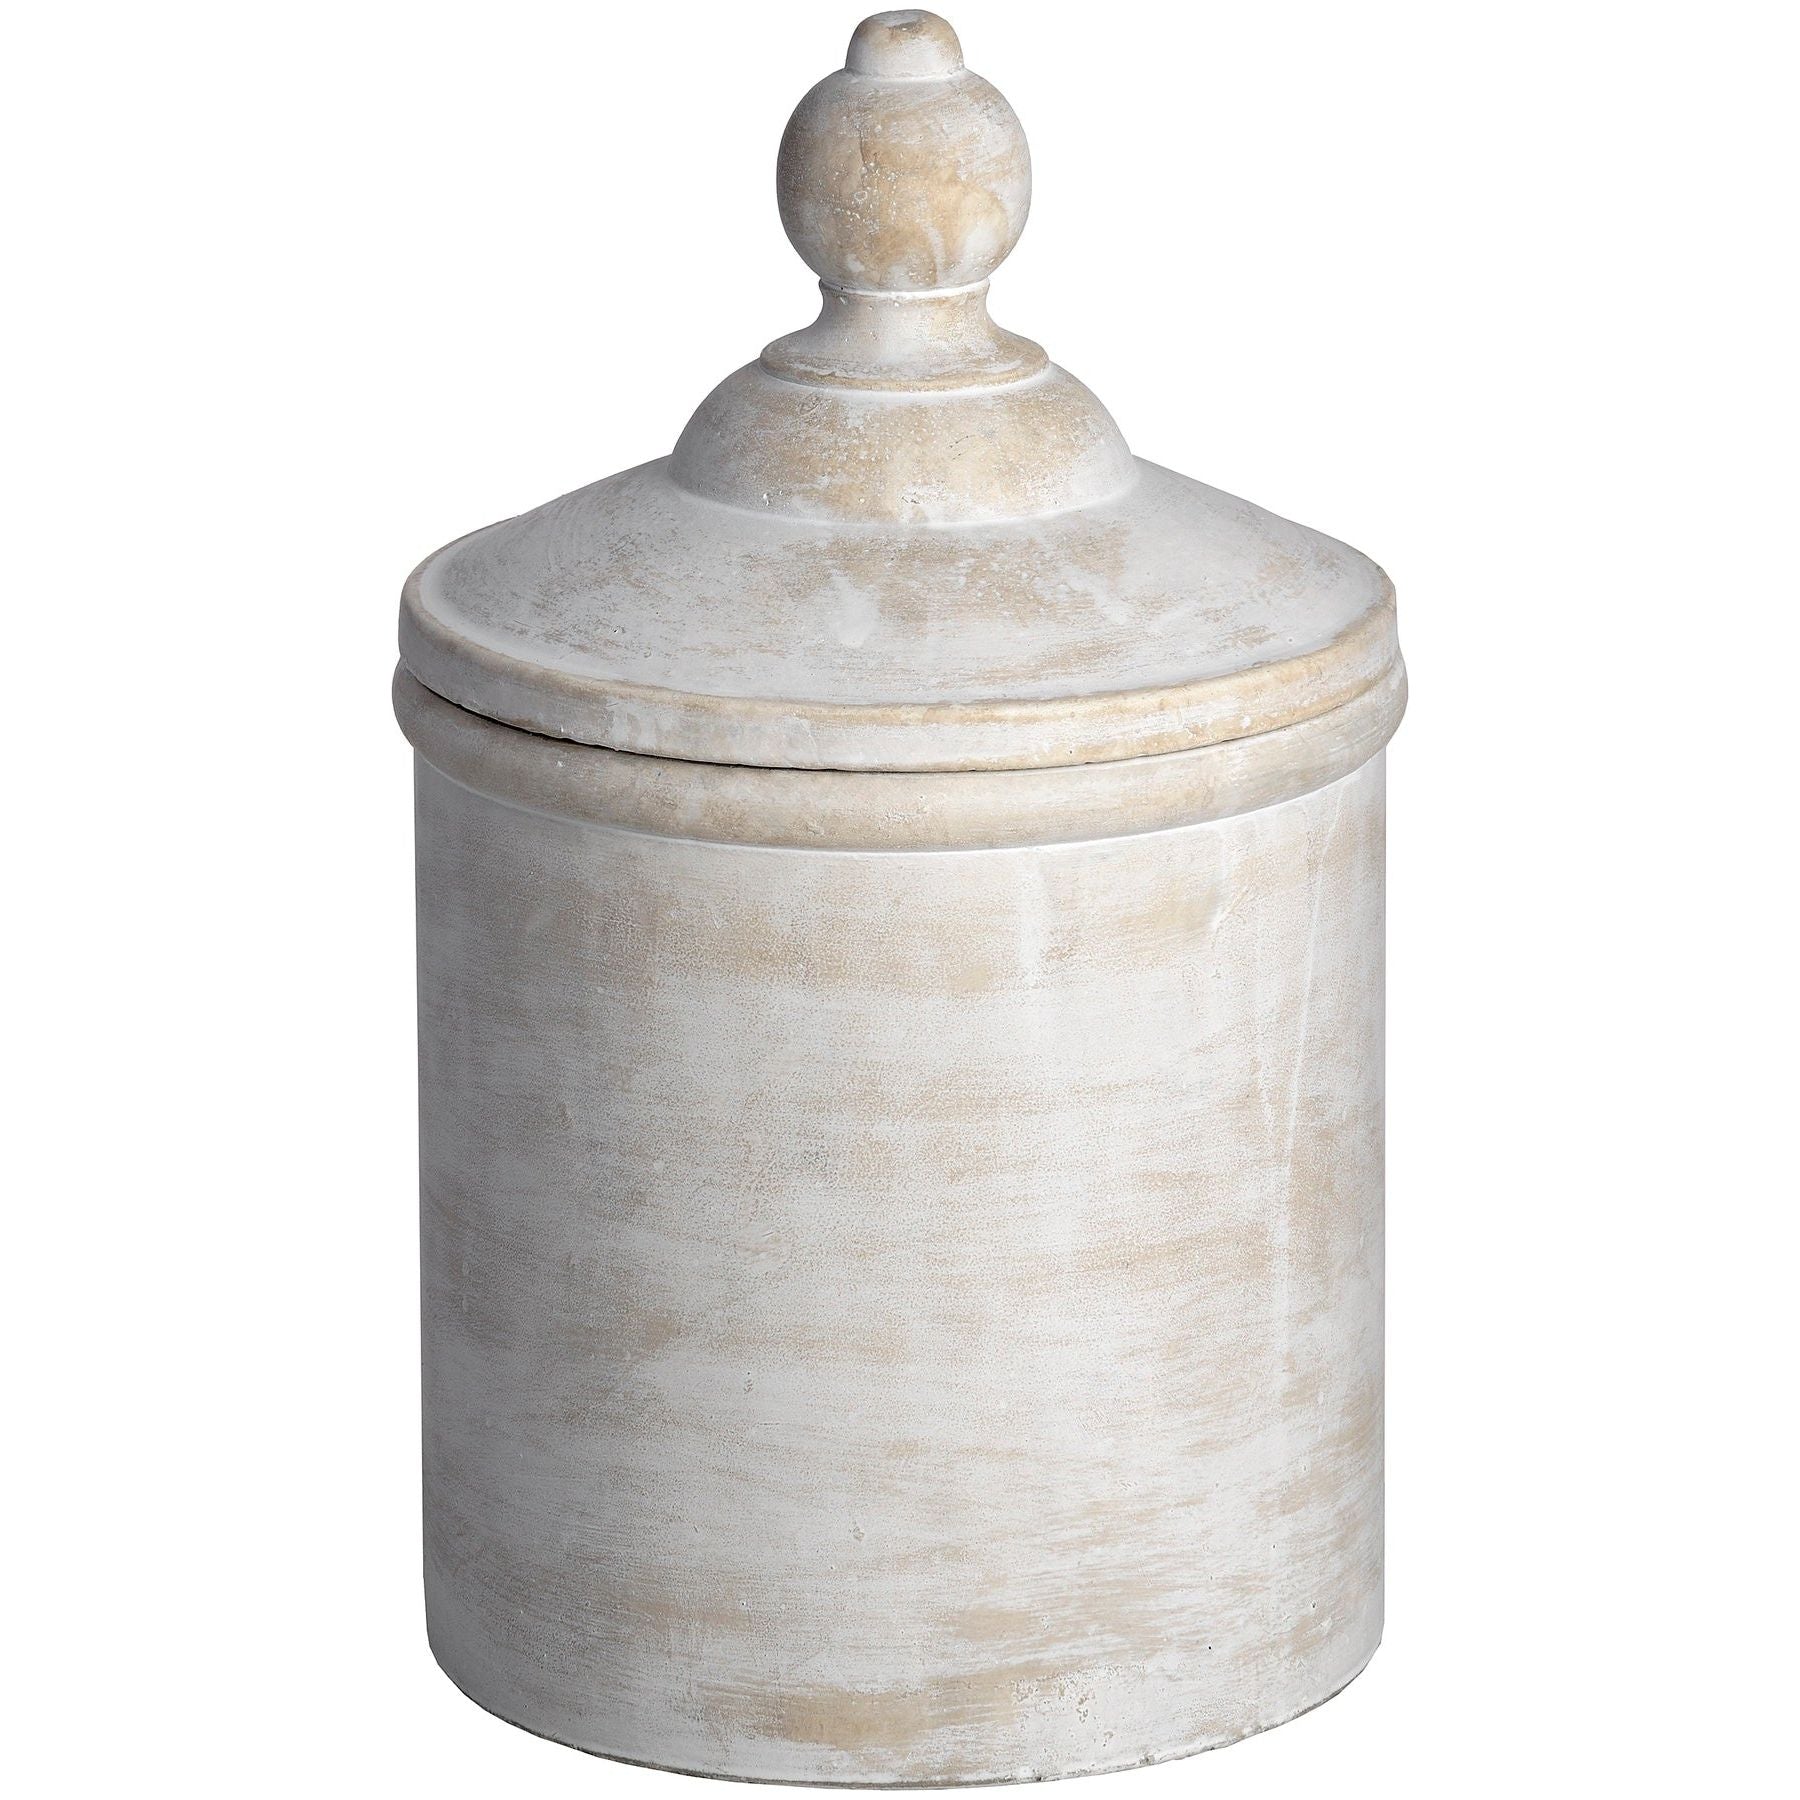 Antique White Cannister - Ashton and Finch